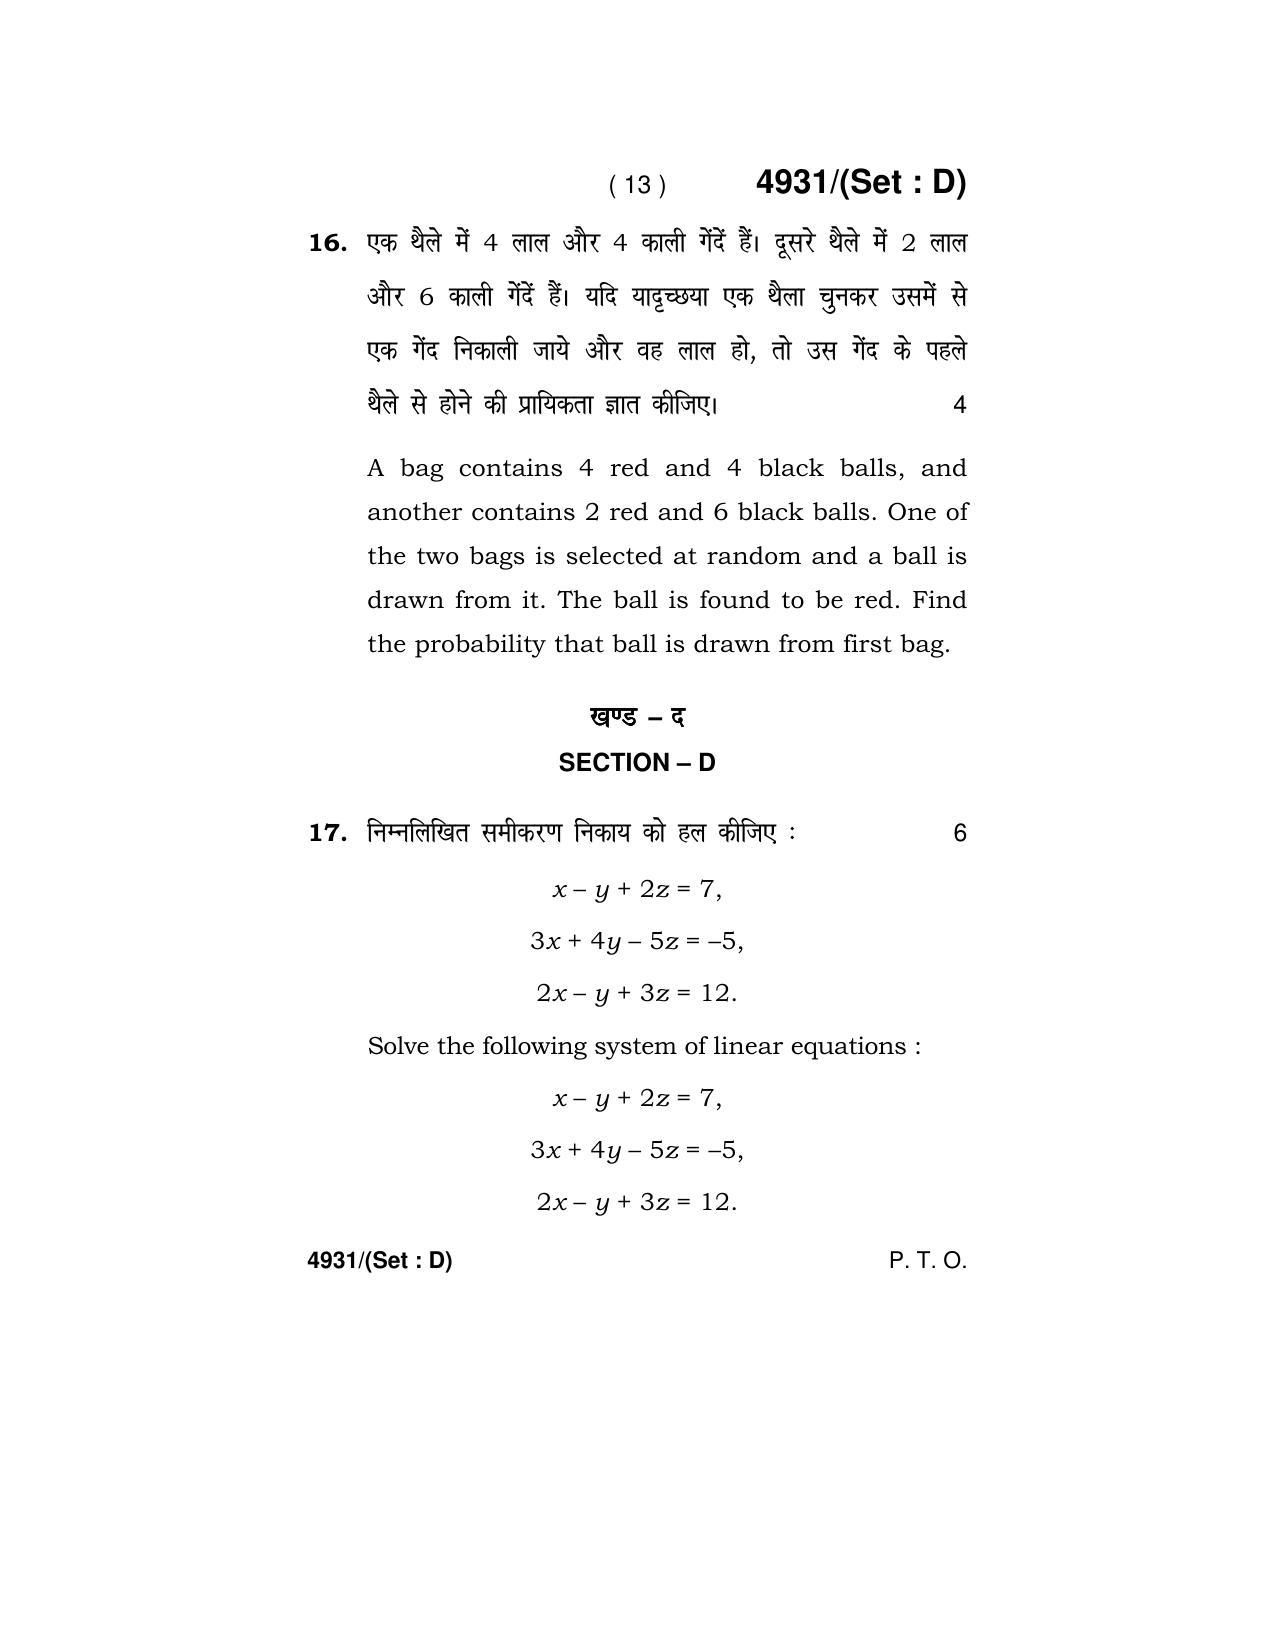 Haryana Board HBSE Class 12 Mathematics 2020 Question Paper - Page 61